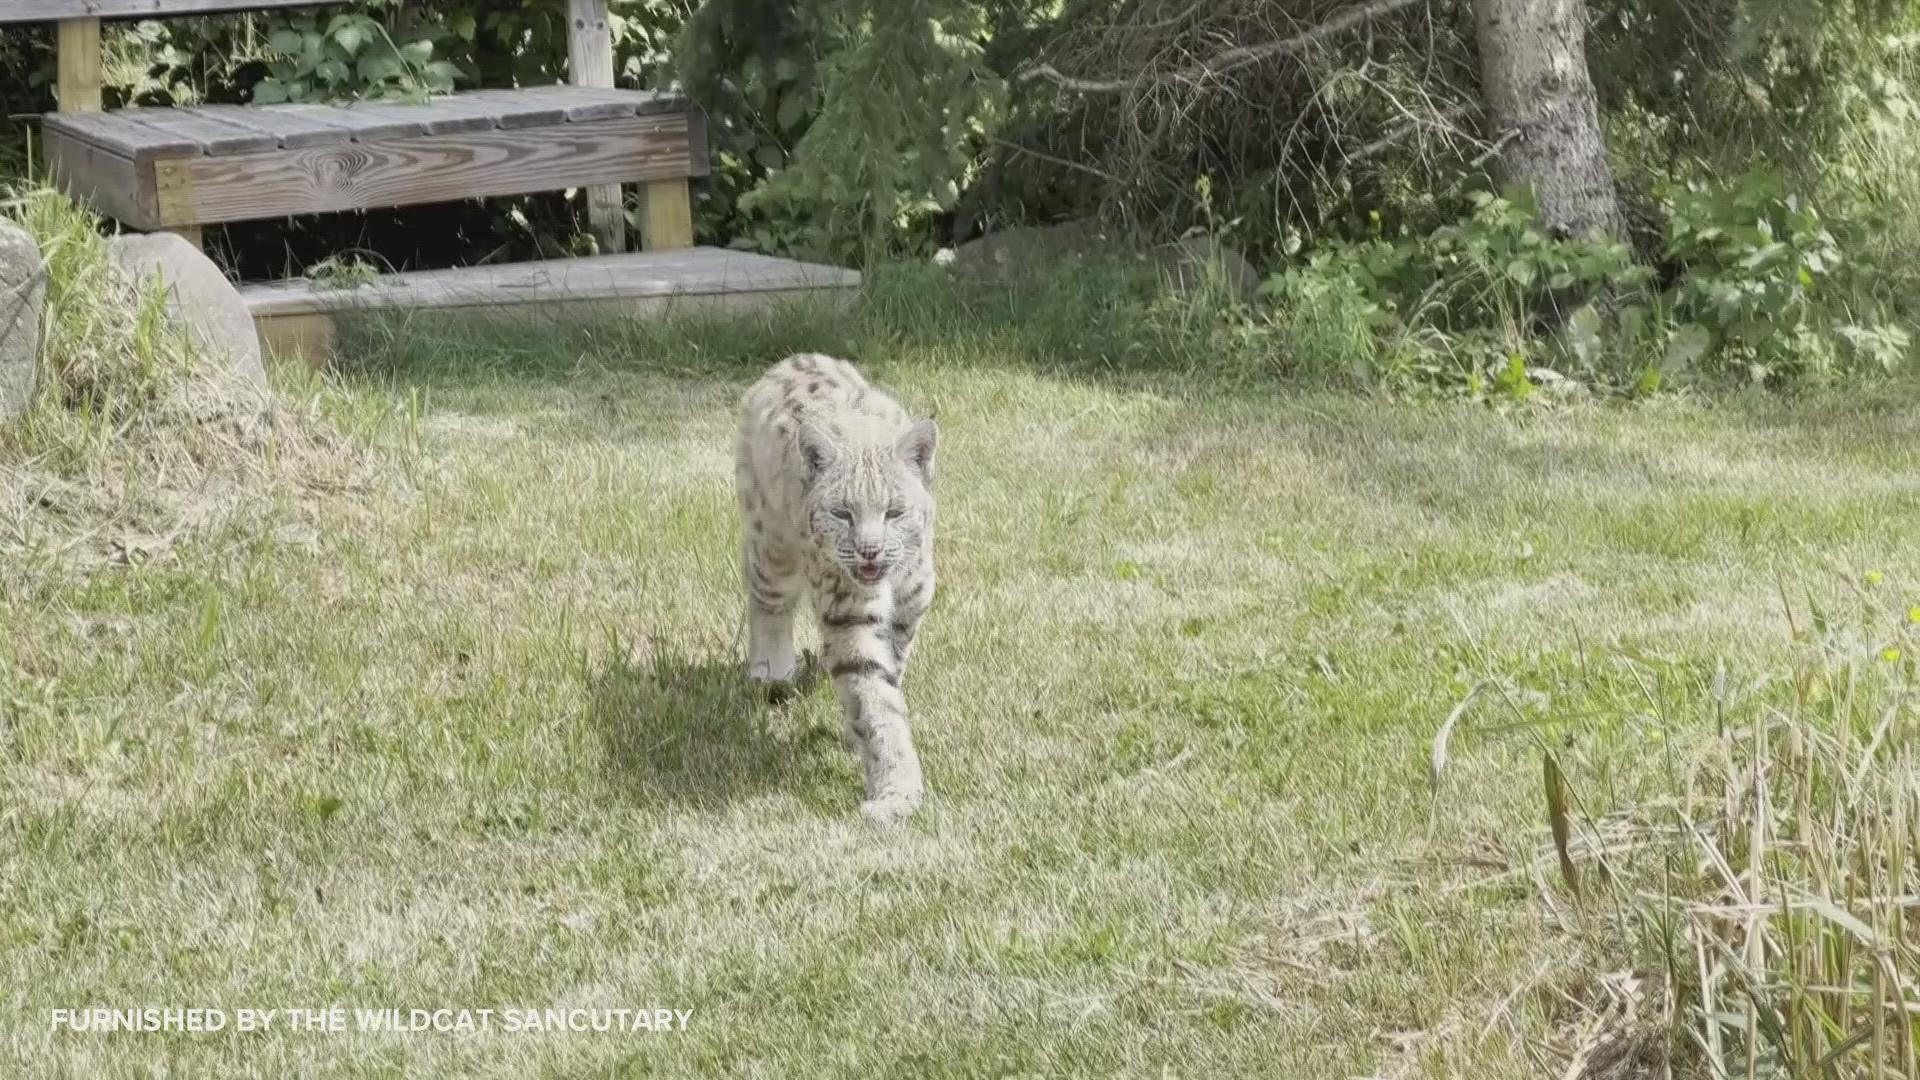 The elderly bobcat is actually 19 years old, and arthritis was making it hard for him to get around. A stem cell procedure may change that.